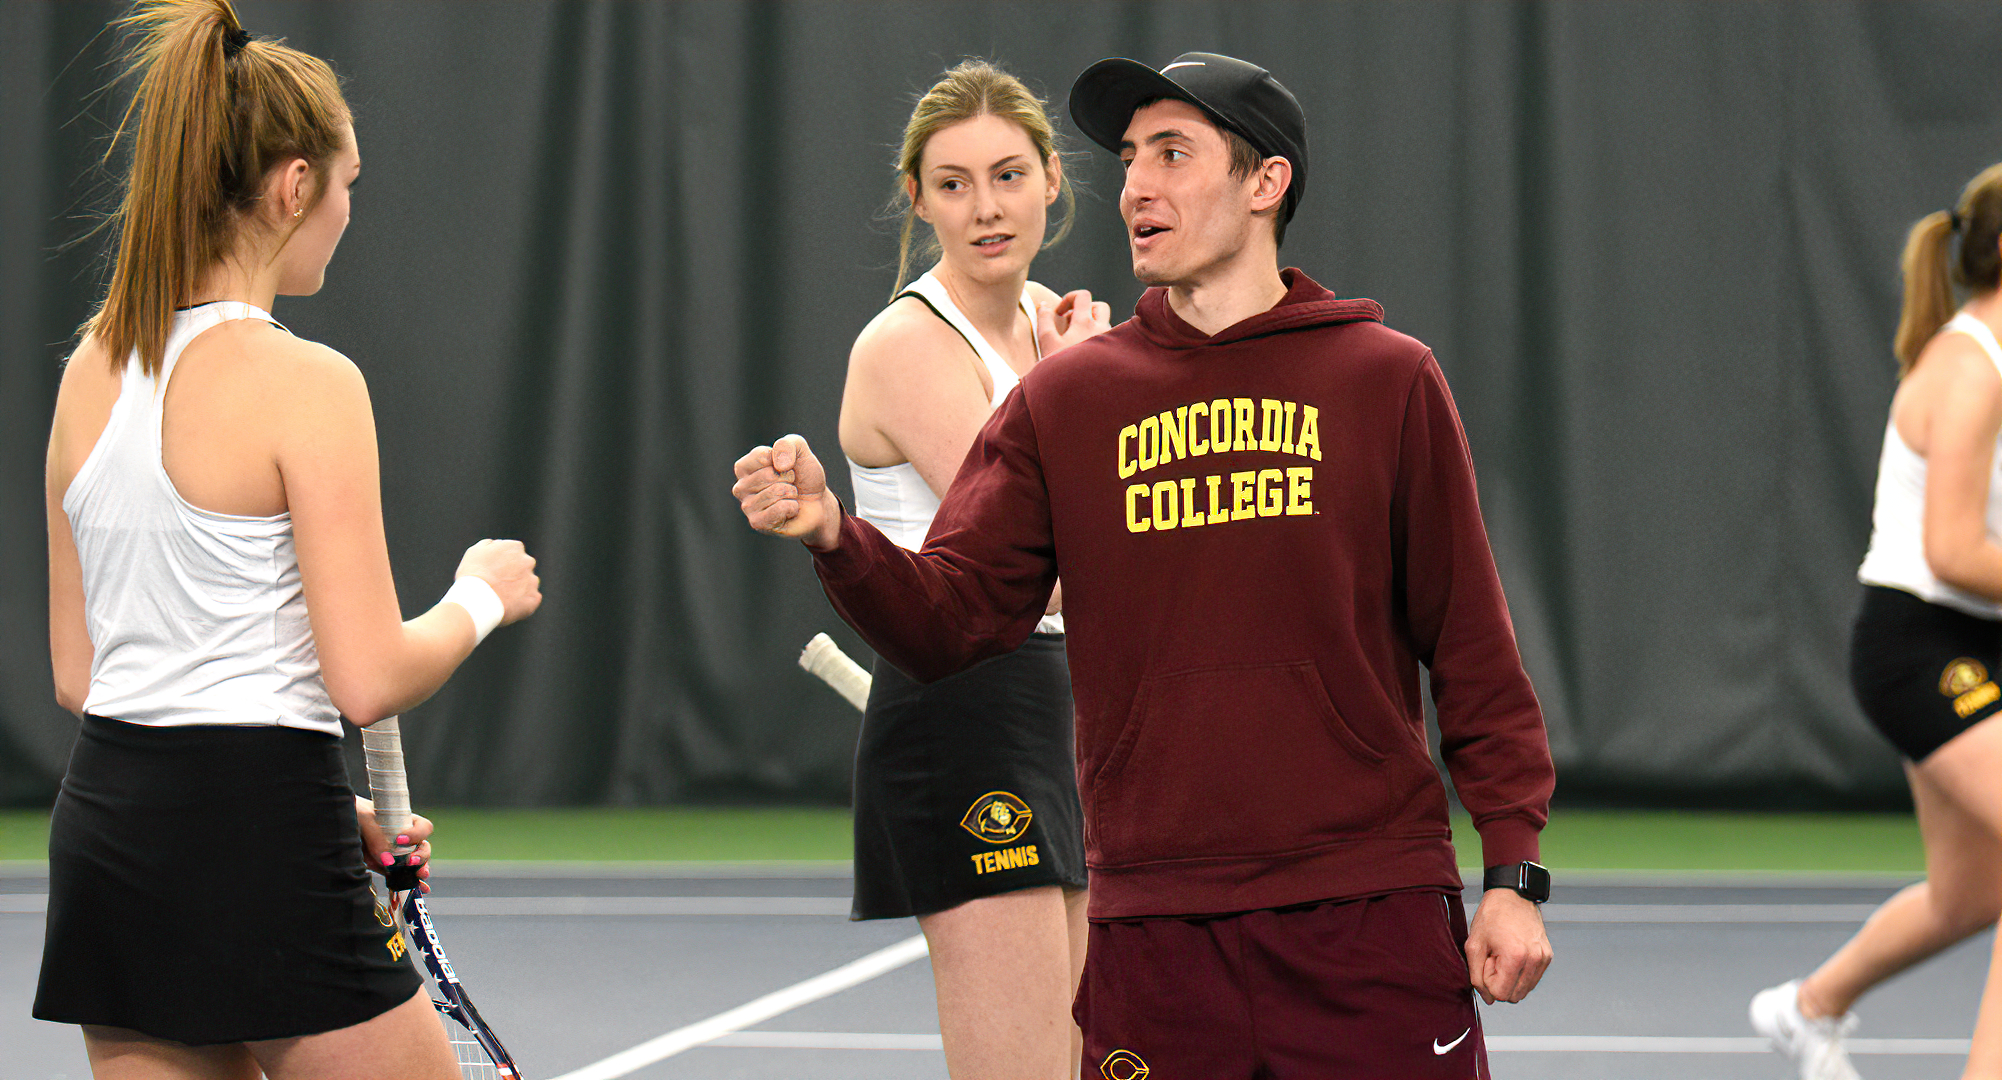 Zach Zitur announced his resignation as head coach for the Cobbers. He was the head coach for the women’s program for five seasons.